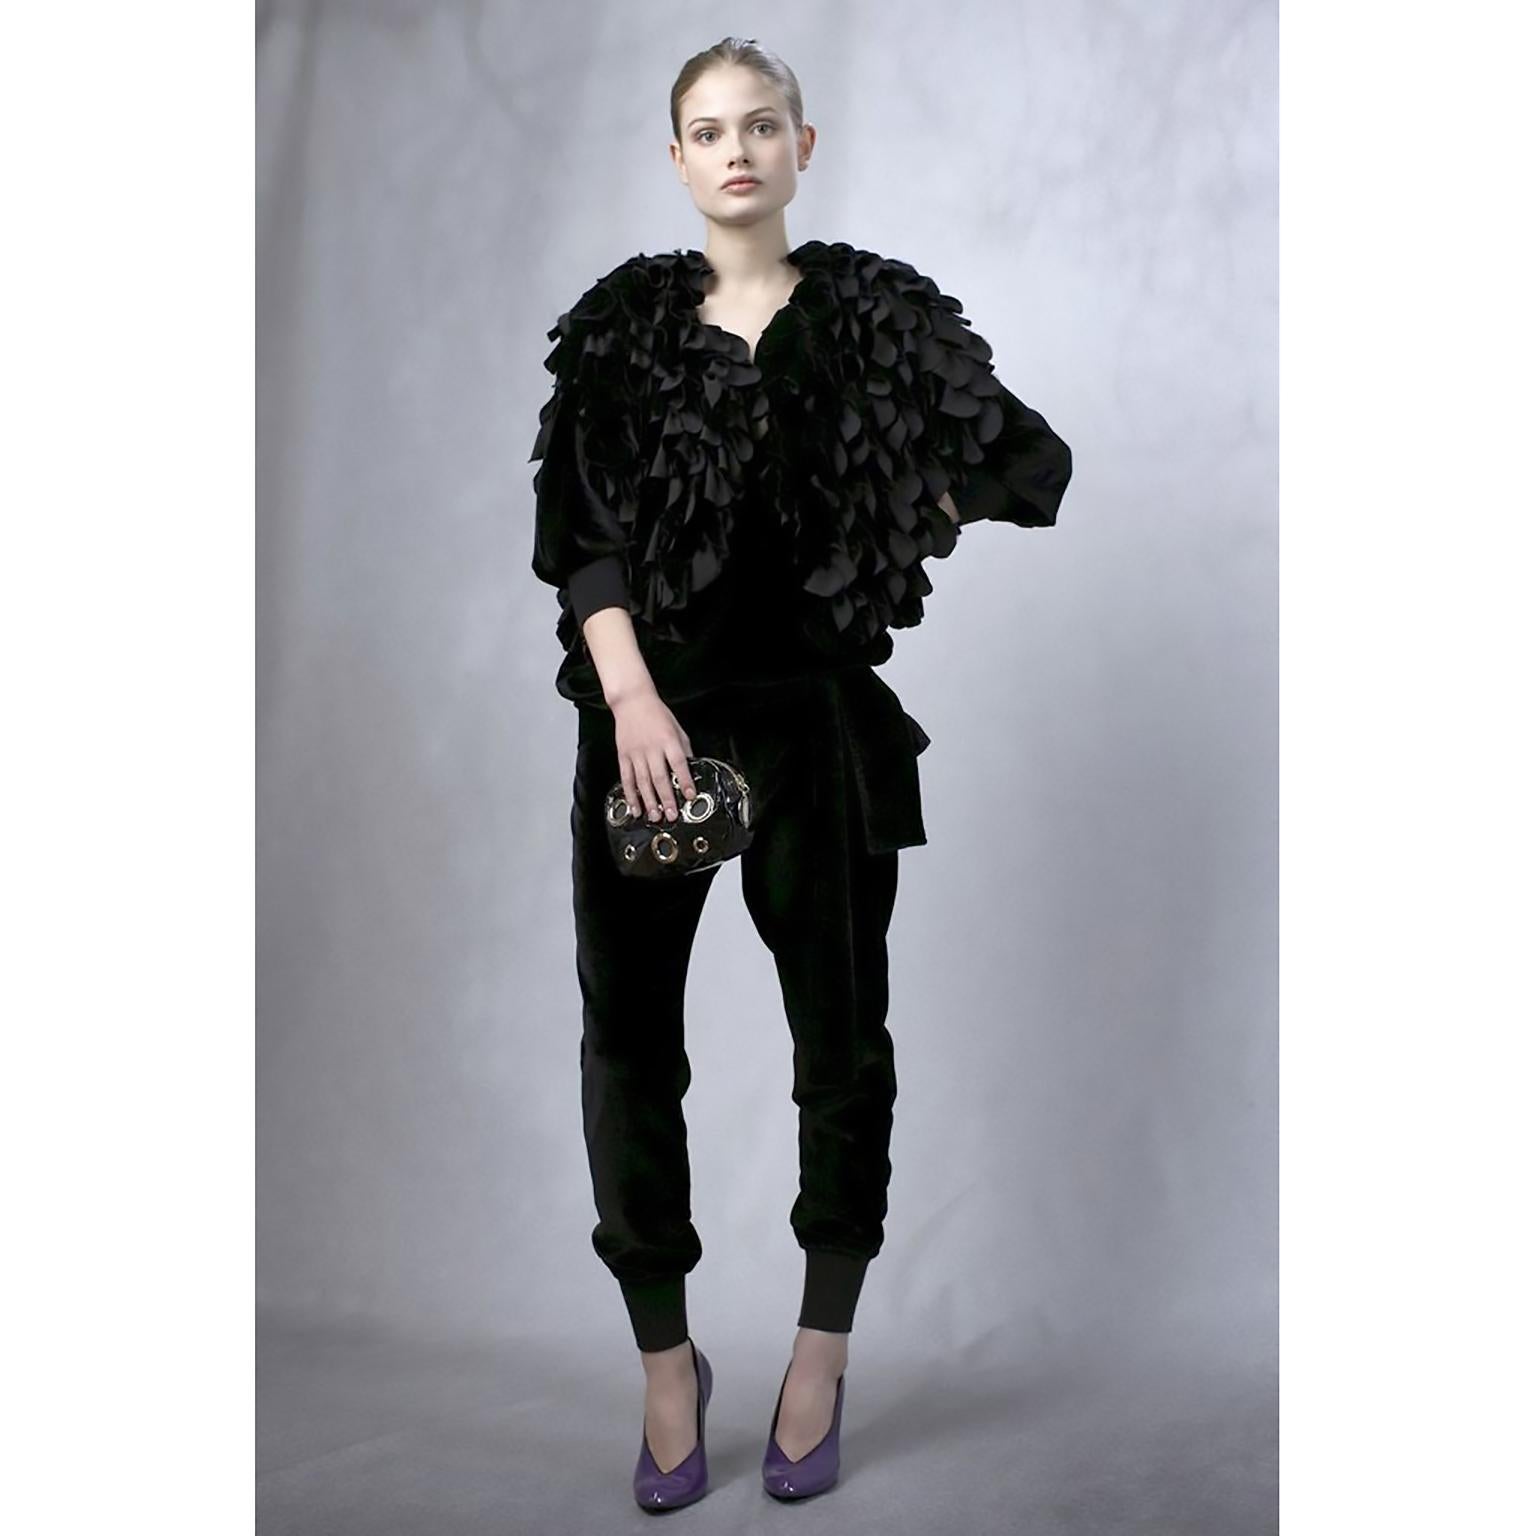 This incredible black evening stole was designed by Stella McCartney for her 2009 pre-fall collection. The wrap has ruffled layers of black silk organza and is beautifully made with silk lining and a black grosgrain ribbon tie.  Made in Italy, this